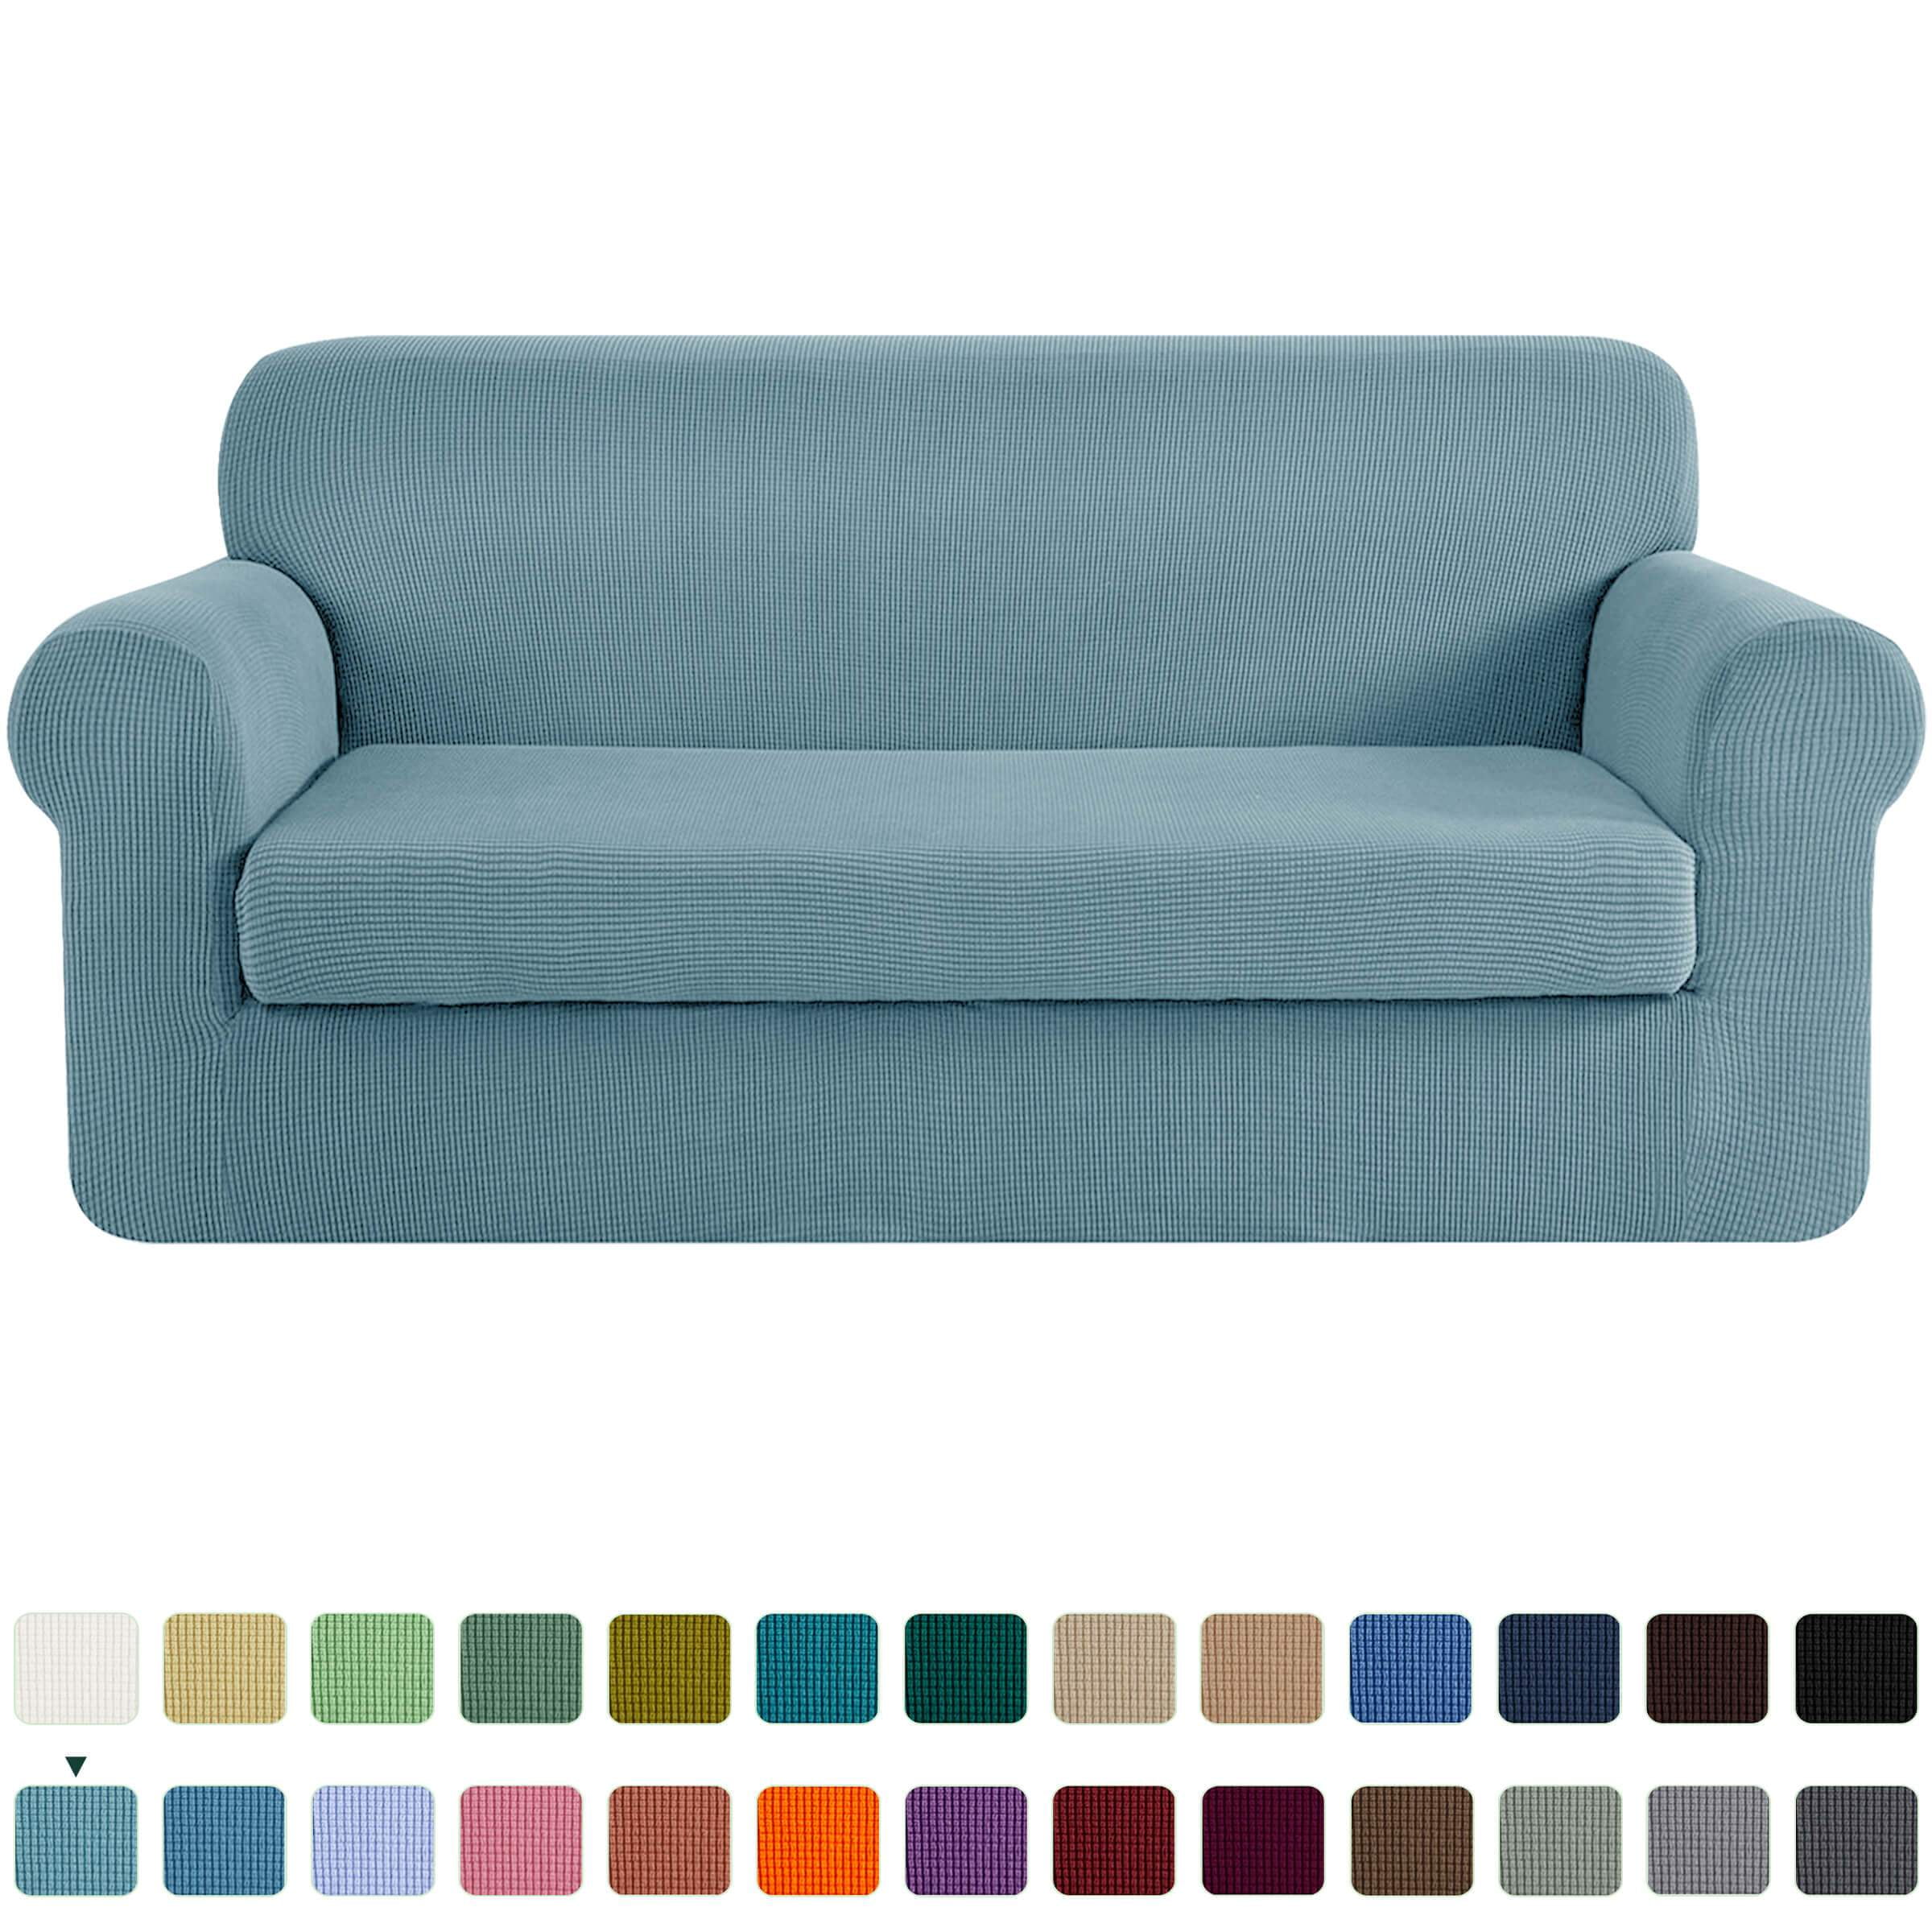 CHUN YI Stretch Sofa Cover with 2 Separate Seat Cushion Covers Soft Thick Spandex Sofa Slipcovers Loveseat, Blue Couch Furniture Protector